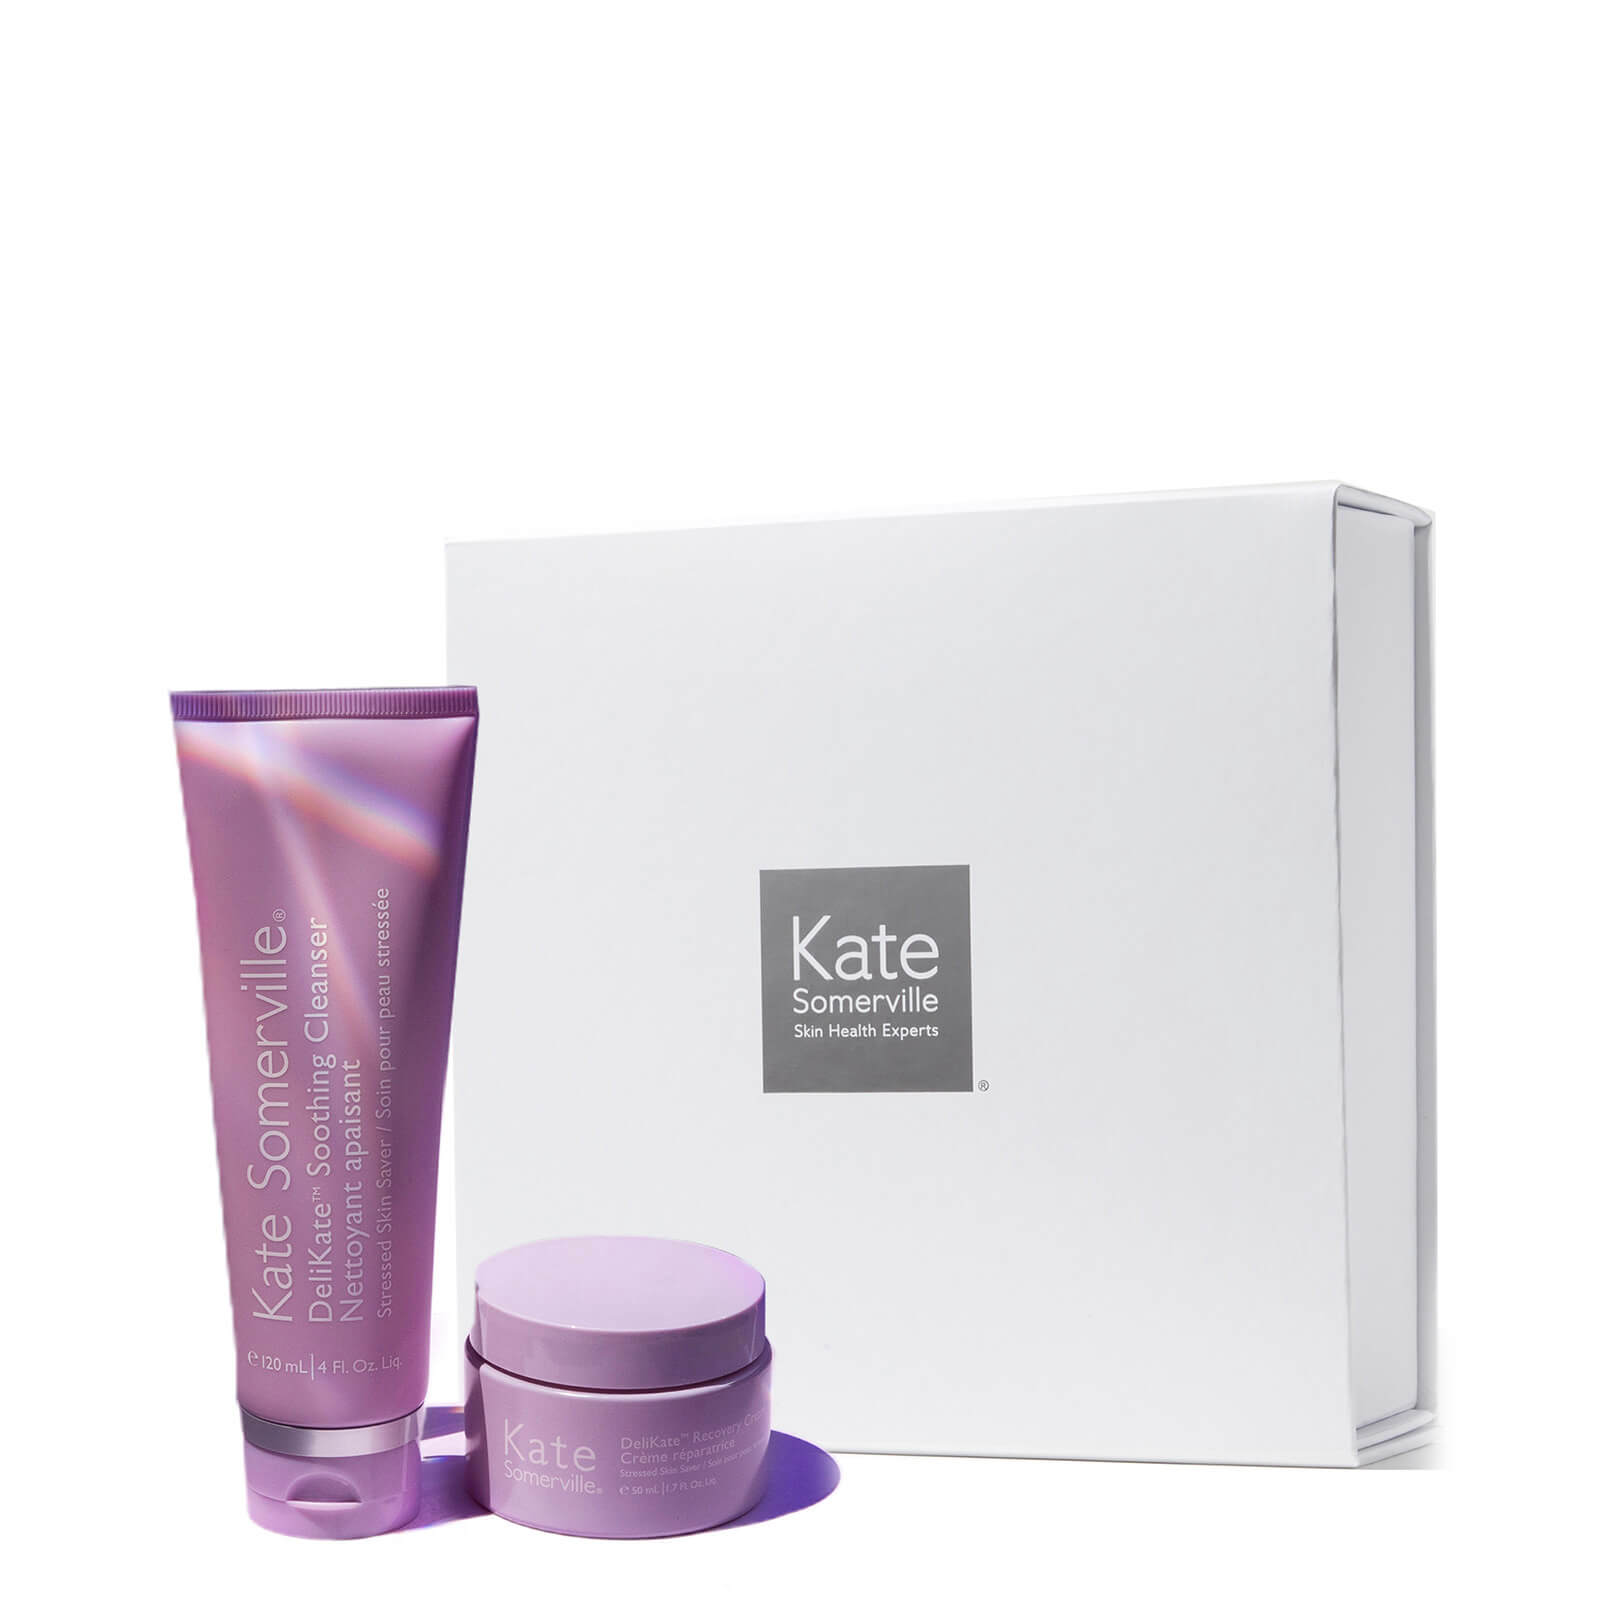 Kate Somerville DeliKate Exclusive Sensitive Skin Duo (Worth £103.00)